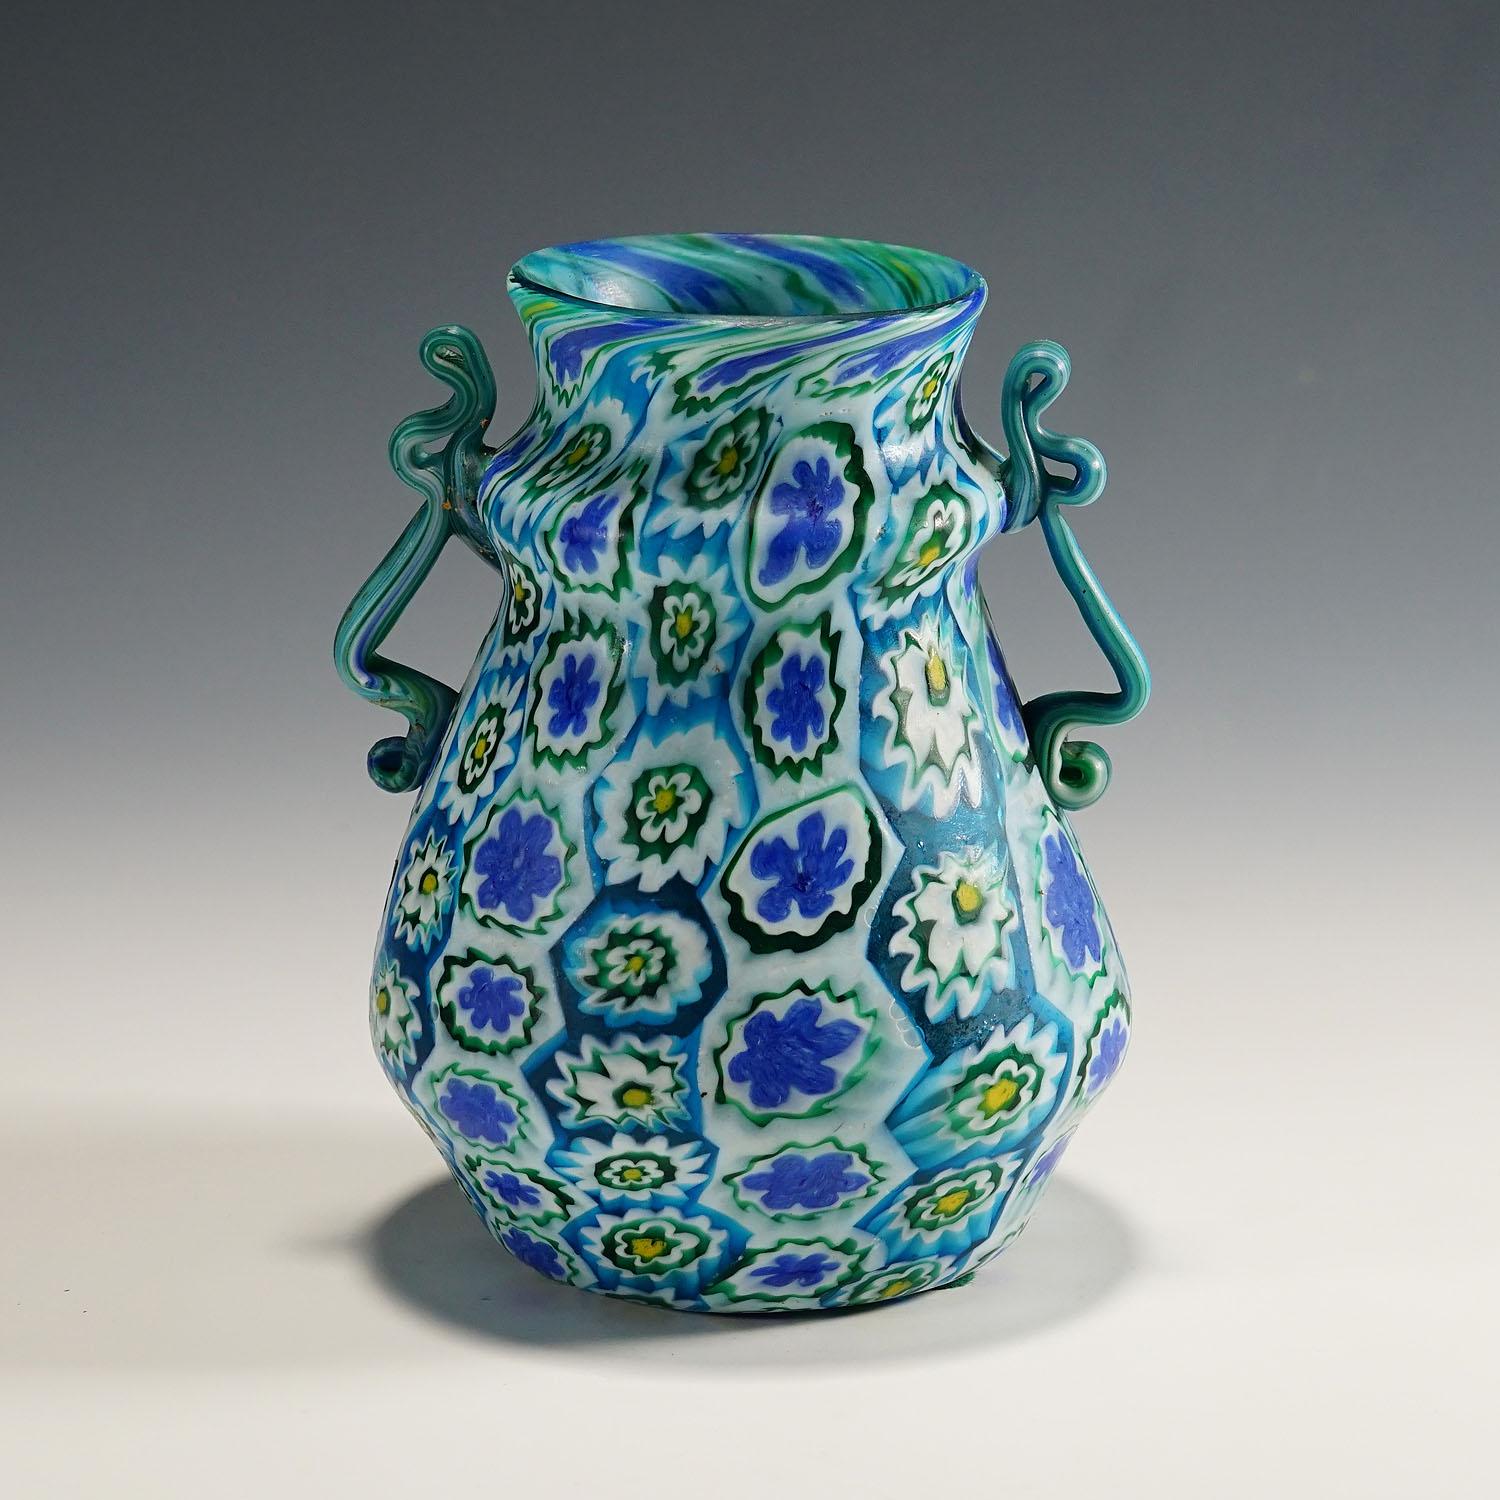 Large Antique Millefiori Vase with Handles, Fratelli Toso Murano, 1910

A large and rare millefiori murrine glass vase manufactured by Vetreria Fratelli Toso, Murano around 1910. Made of polycrome murrines (blue, green, jellow and white) which where